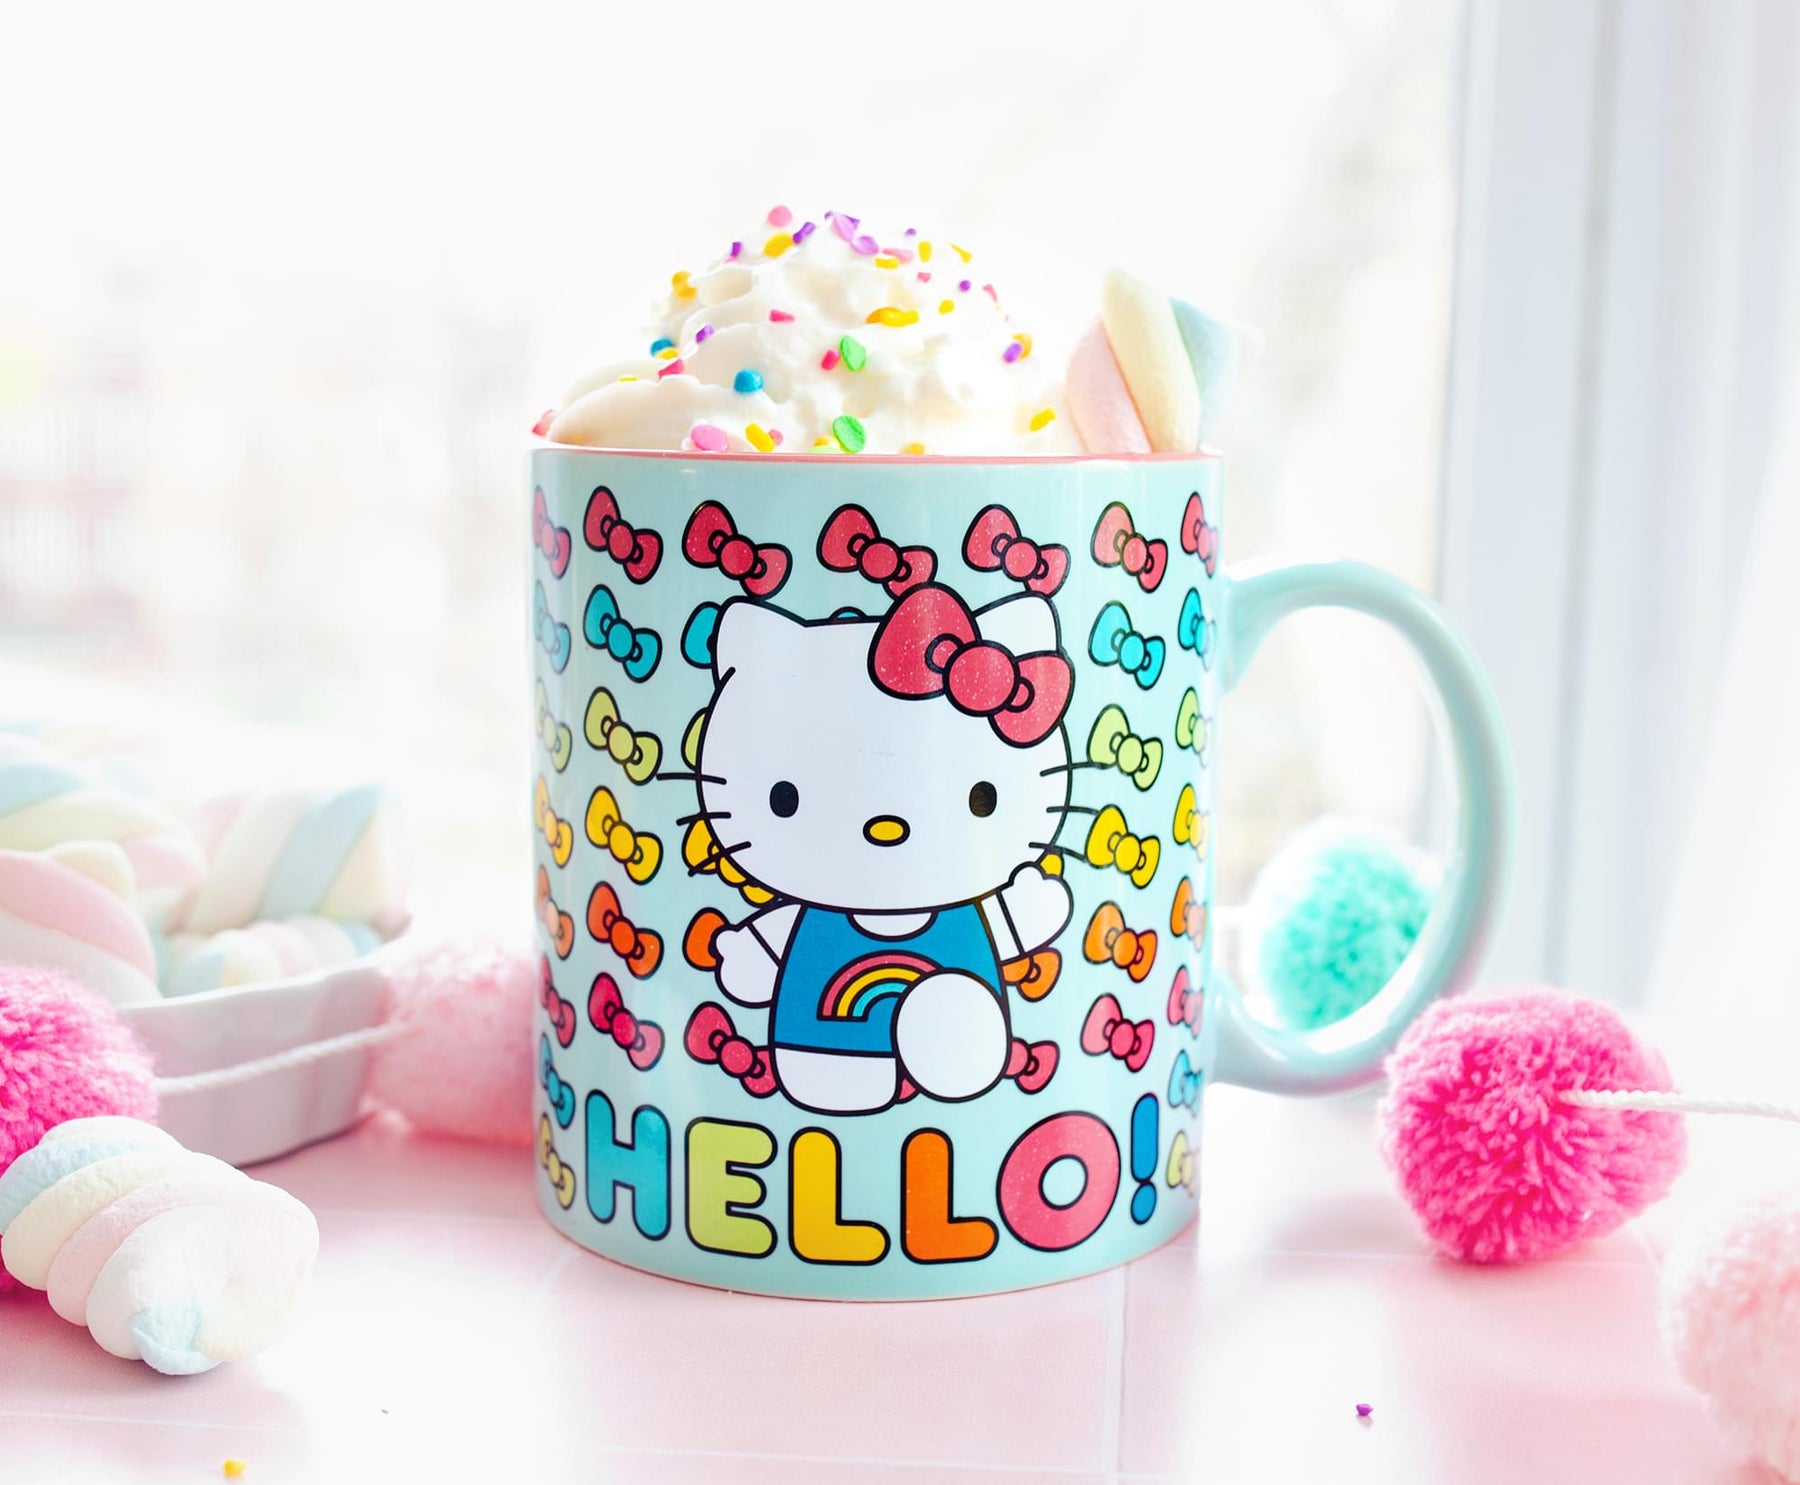 Plush v3 (Cup)  Hello Kitty Cafe